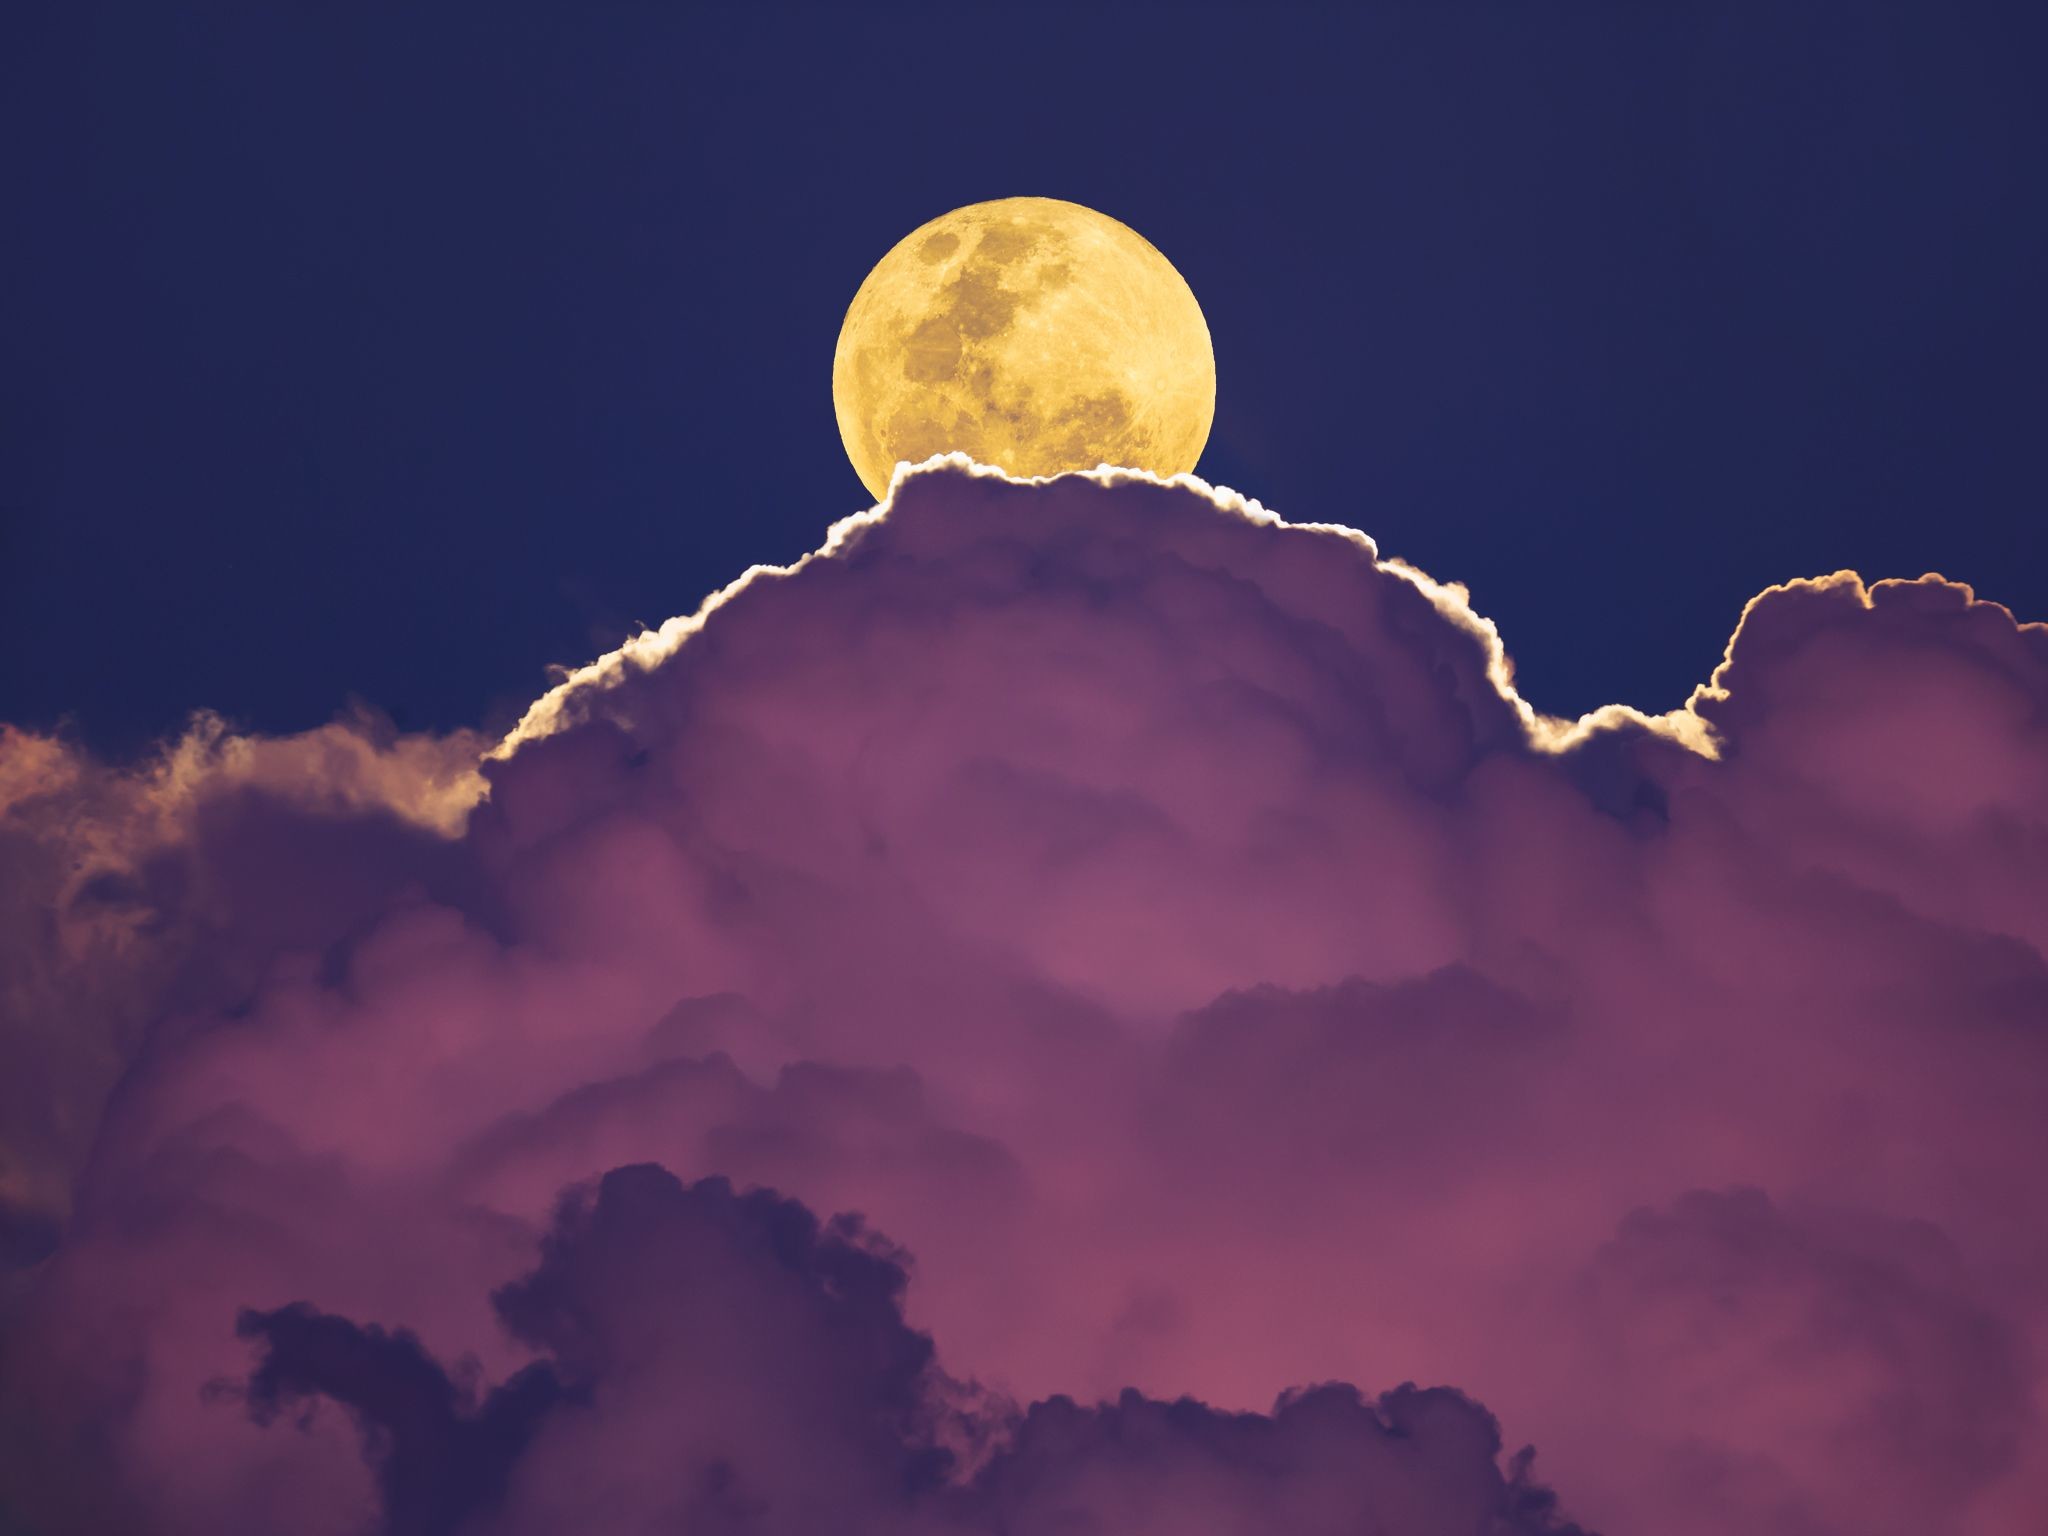 2048x1536 Supermoon rising above electrical storm last night, taken from Cambridge  Super Moon, Hd Wallpaper